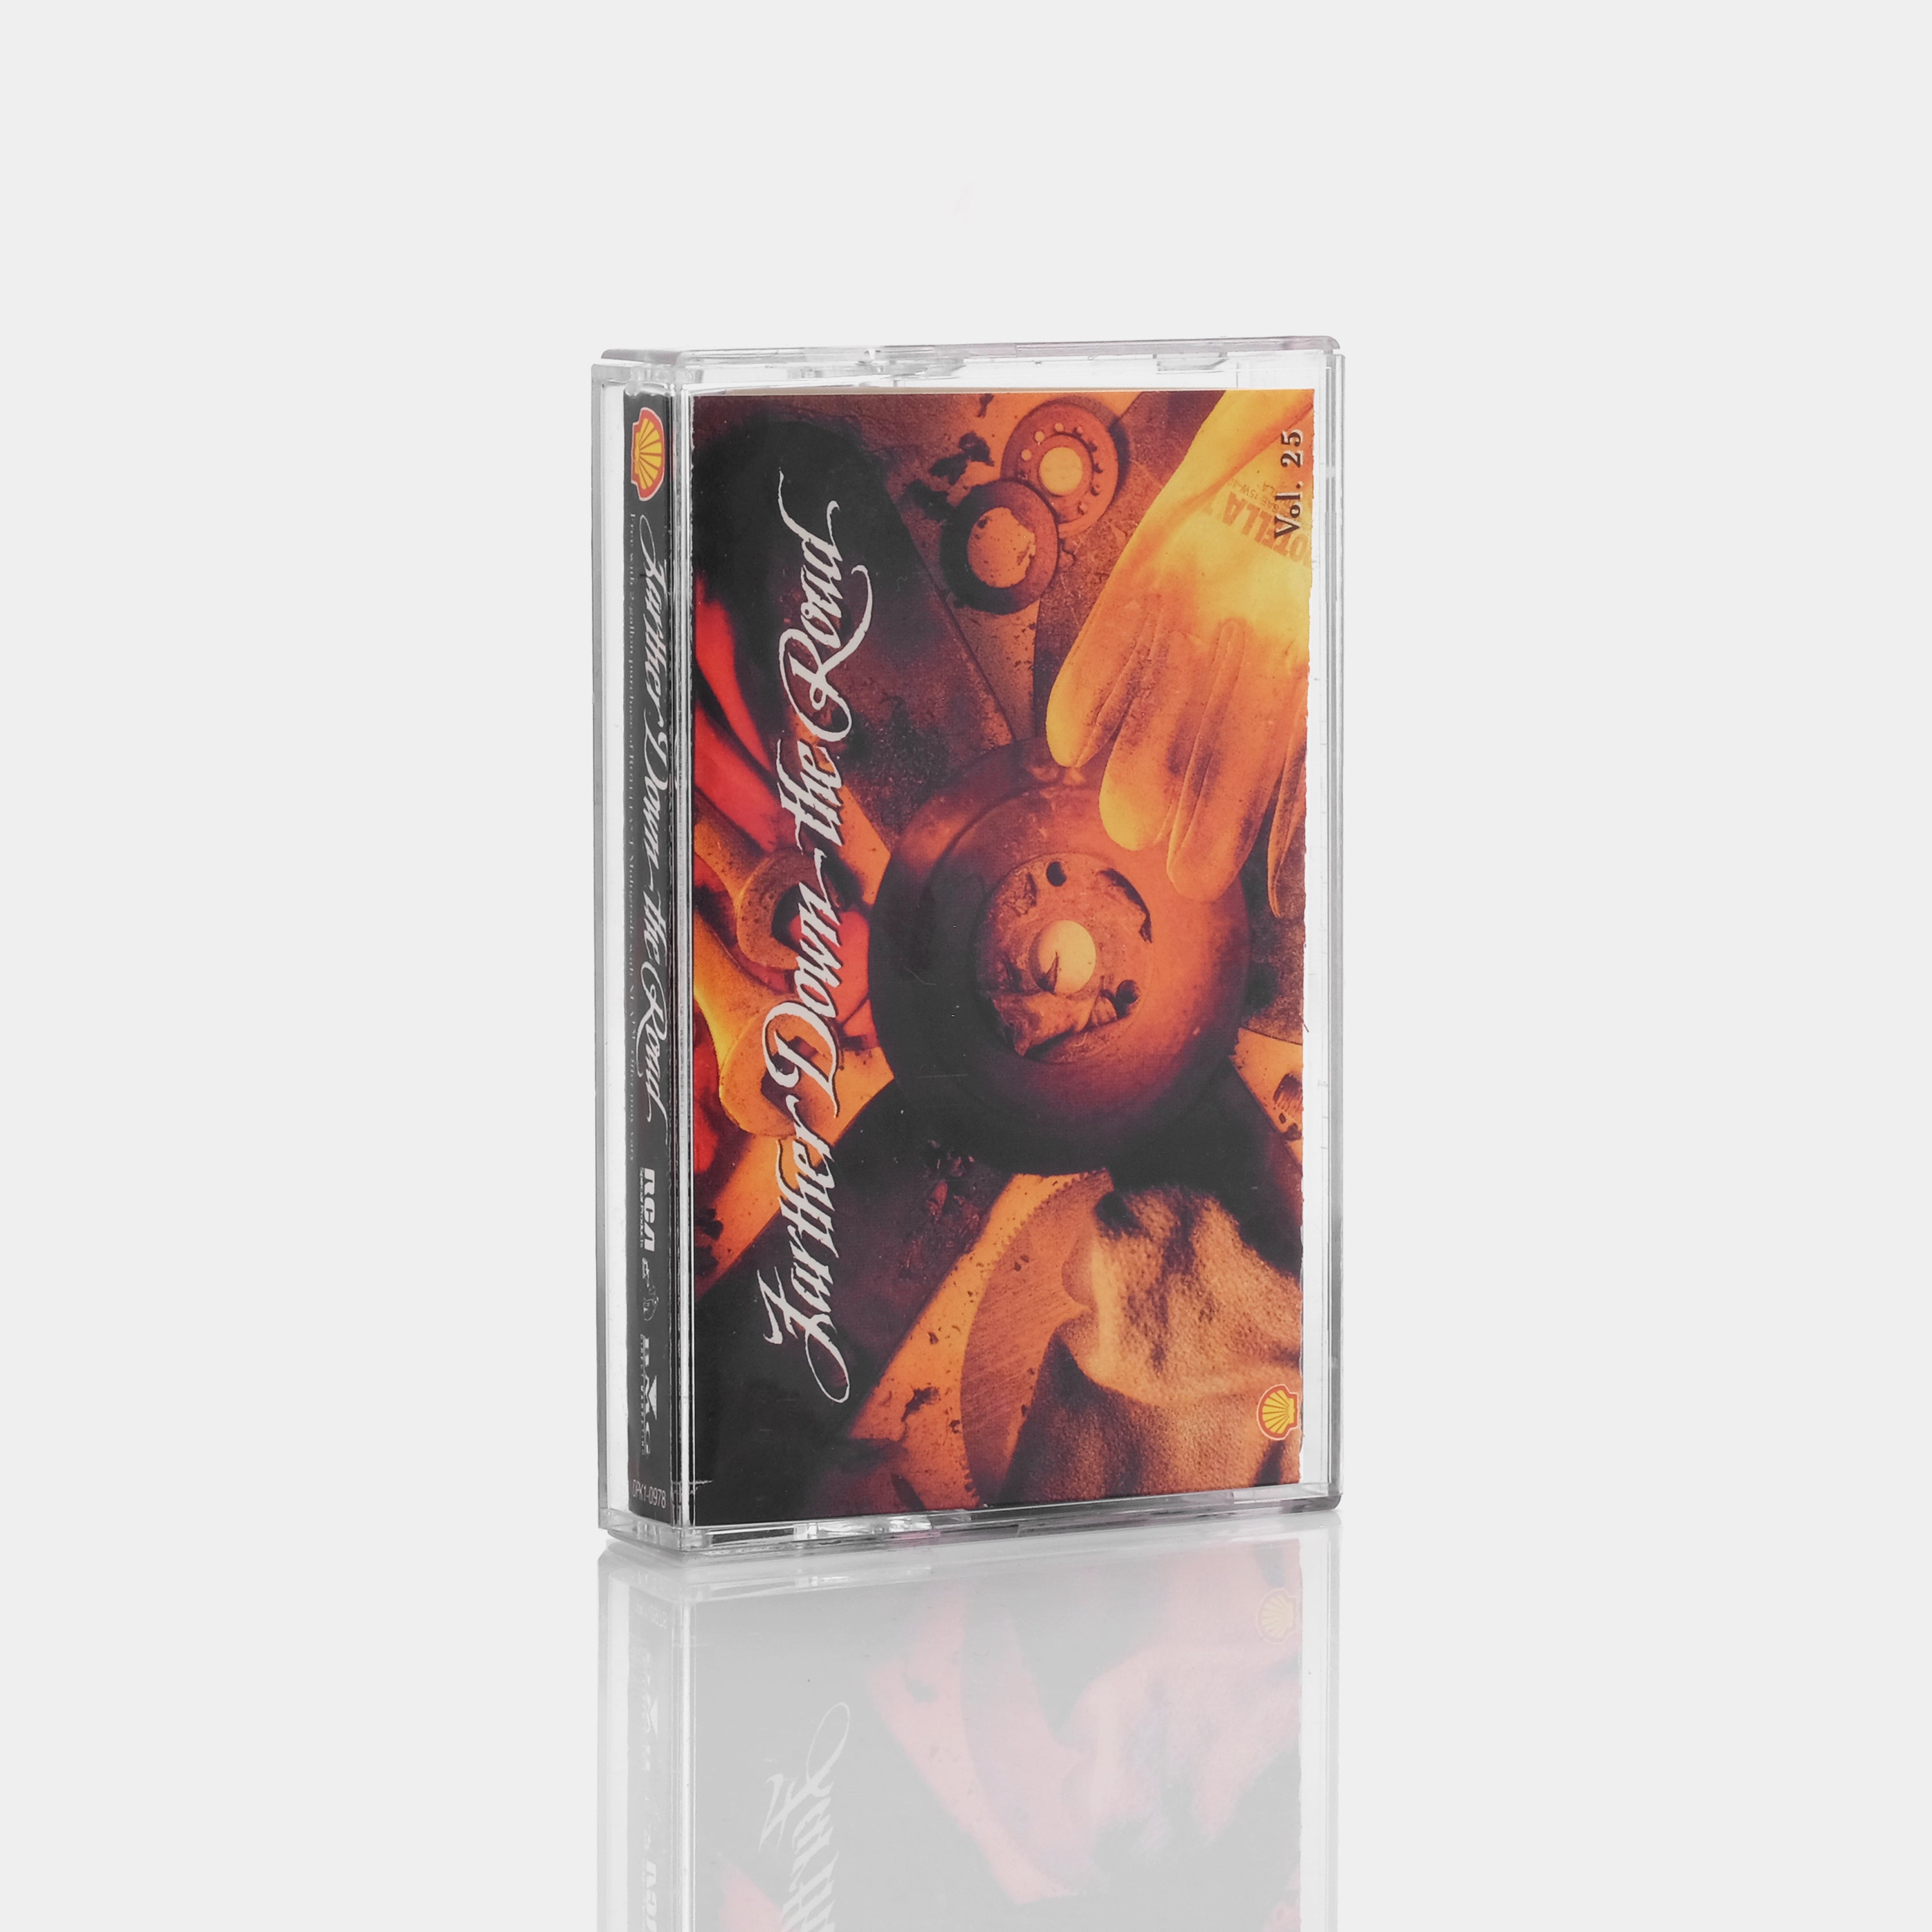 Farther Down The Road (Vol. 25) Cassette Tape